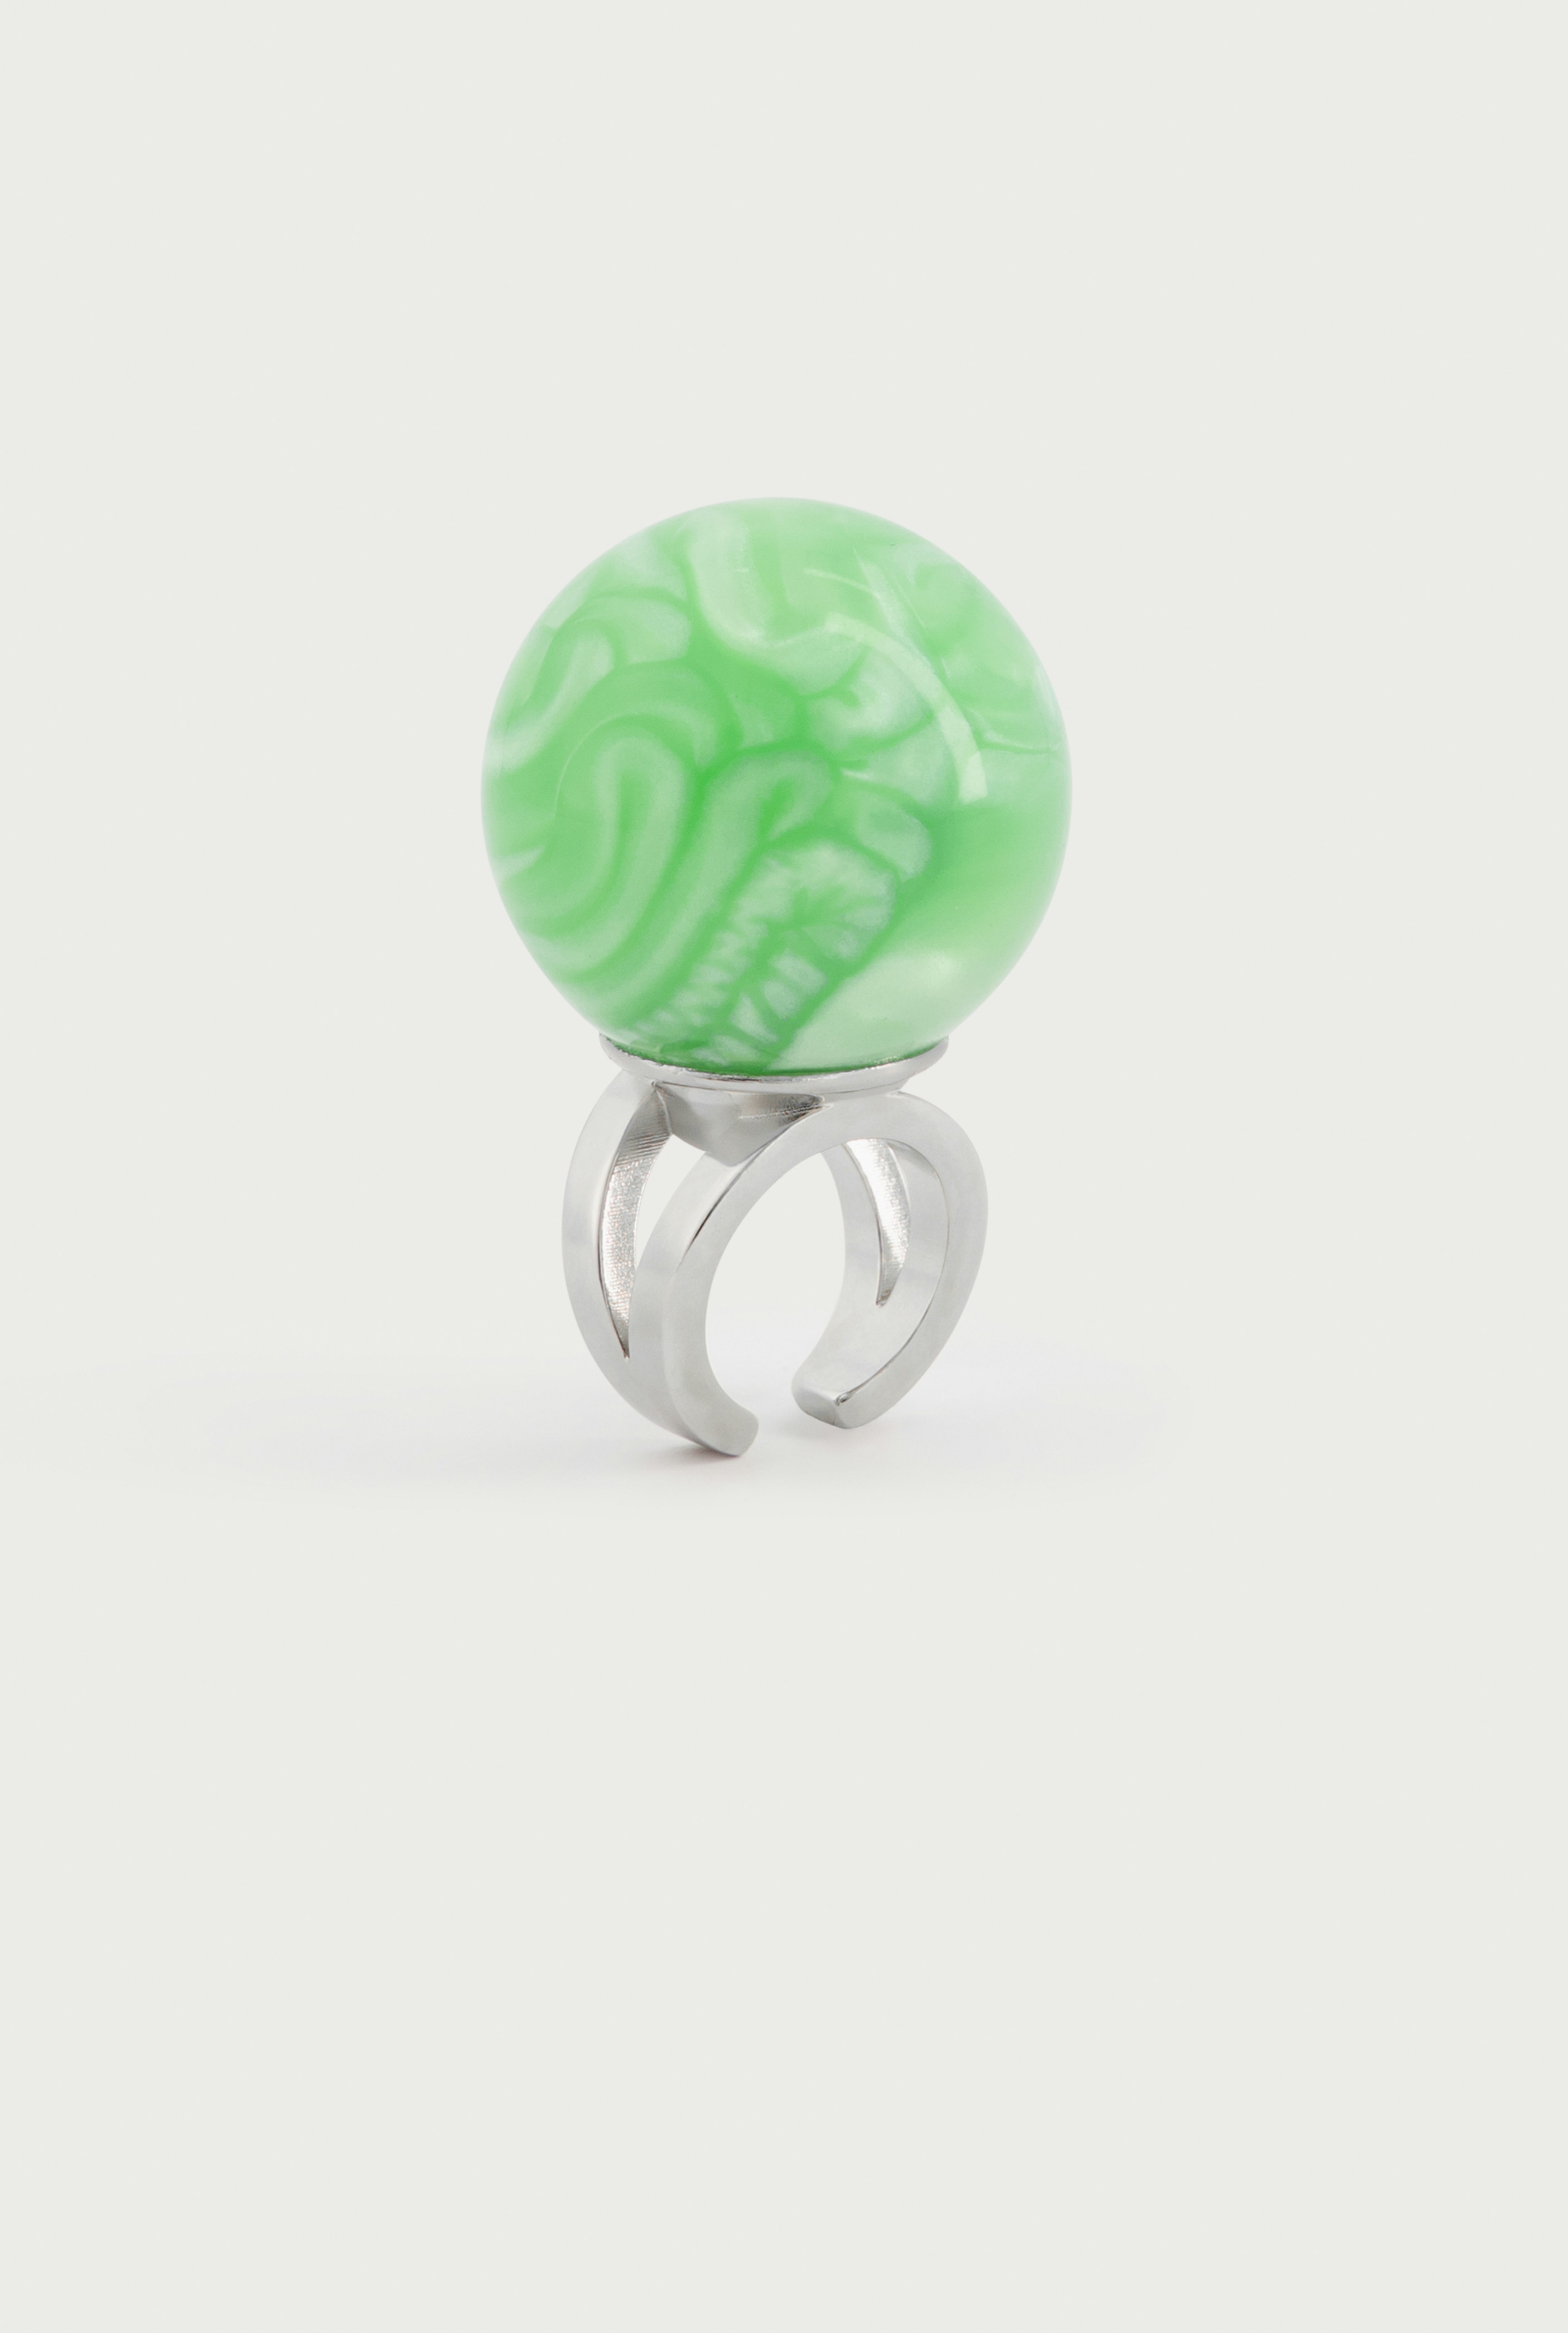 The Green Cyber Ball Ring